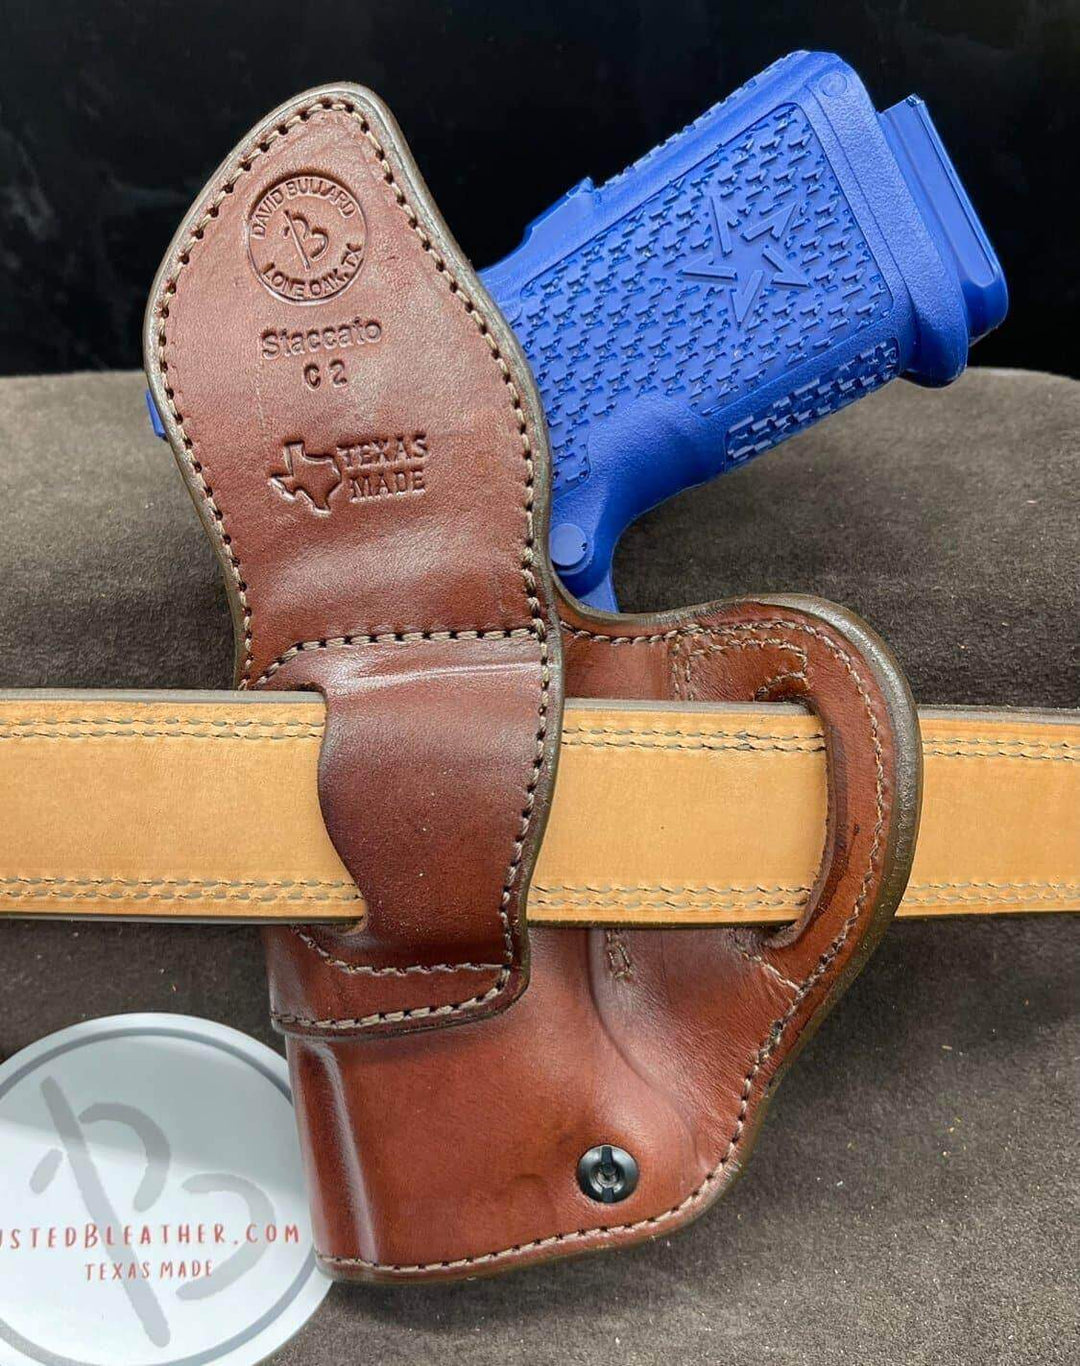 *Made to Order* LH/RH Raptor Holster for Red Dot Optics Made for Your Gun-Busted B Leather